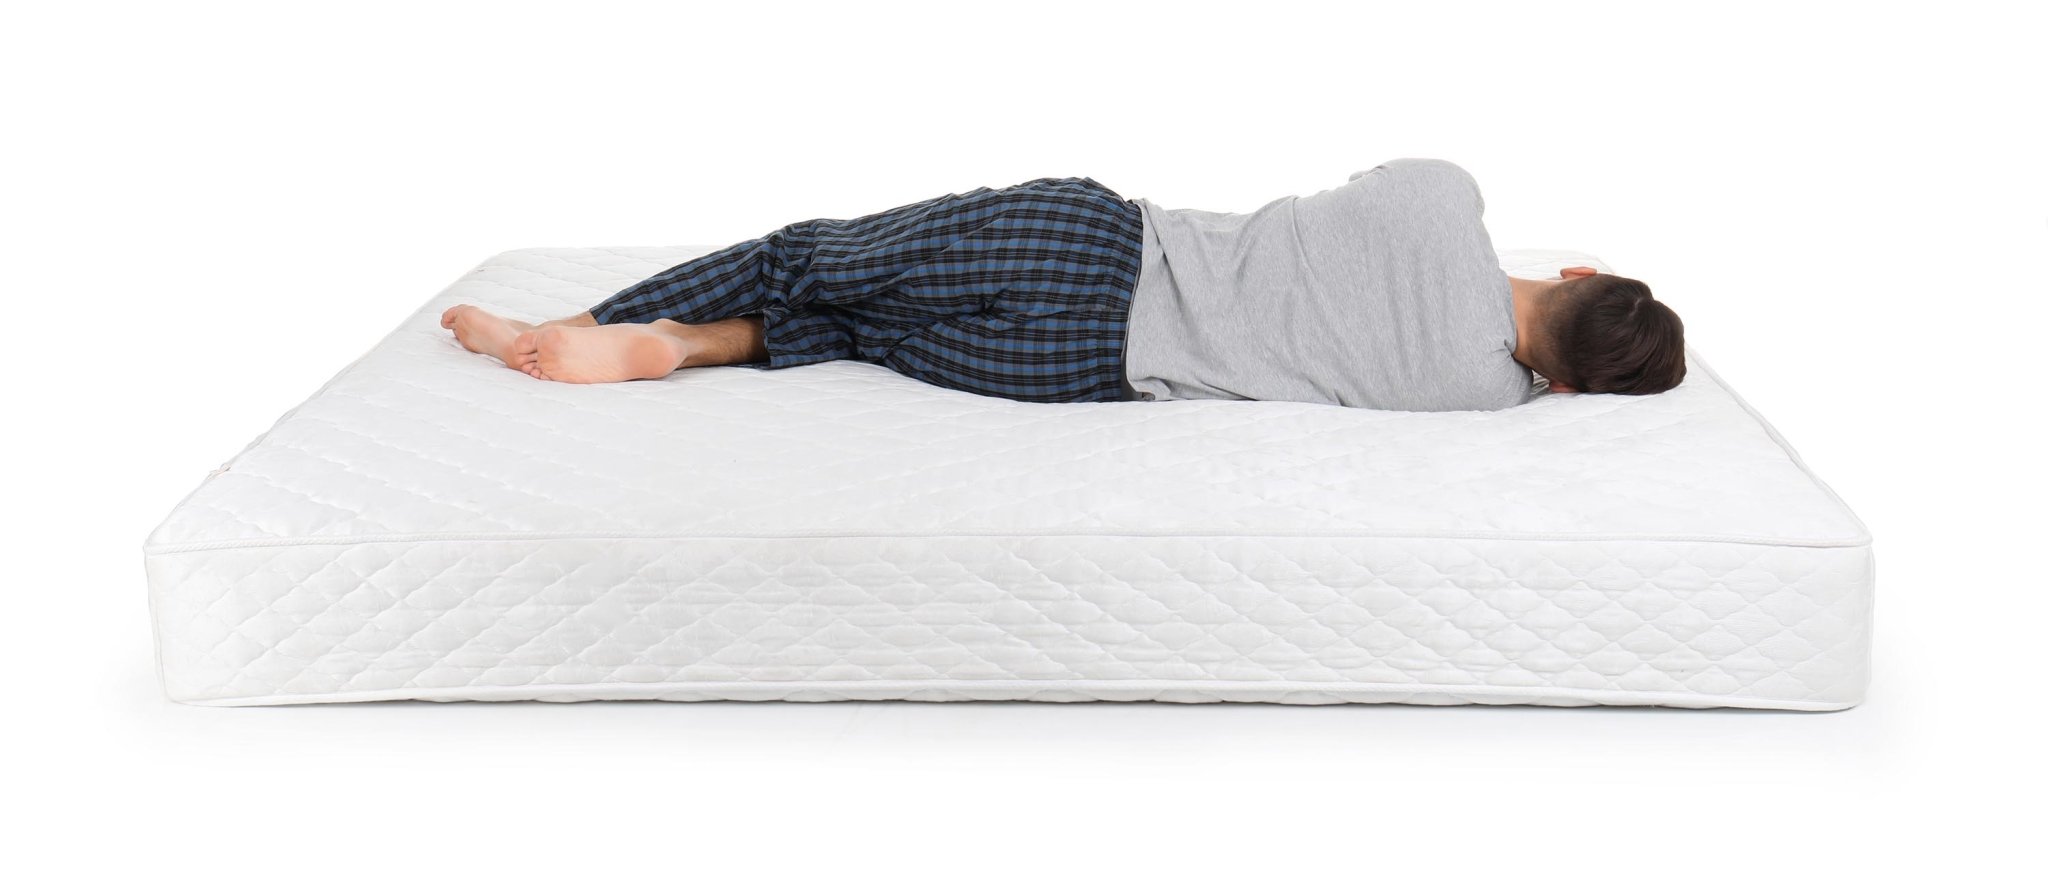 Pro's and Con's of a Latex Mattress, by Sleep Expert